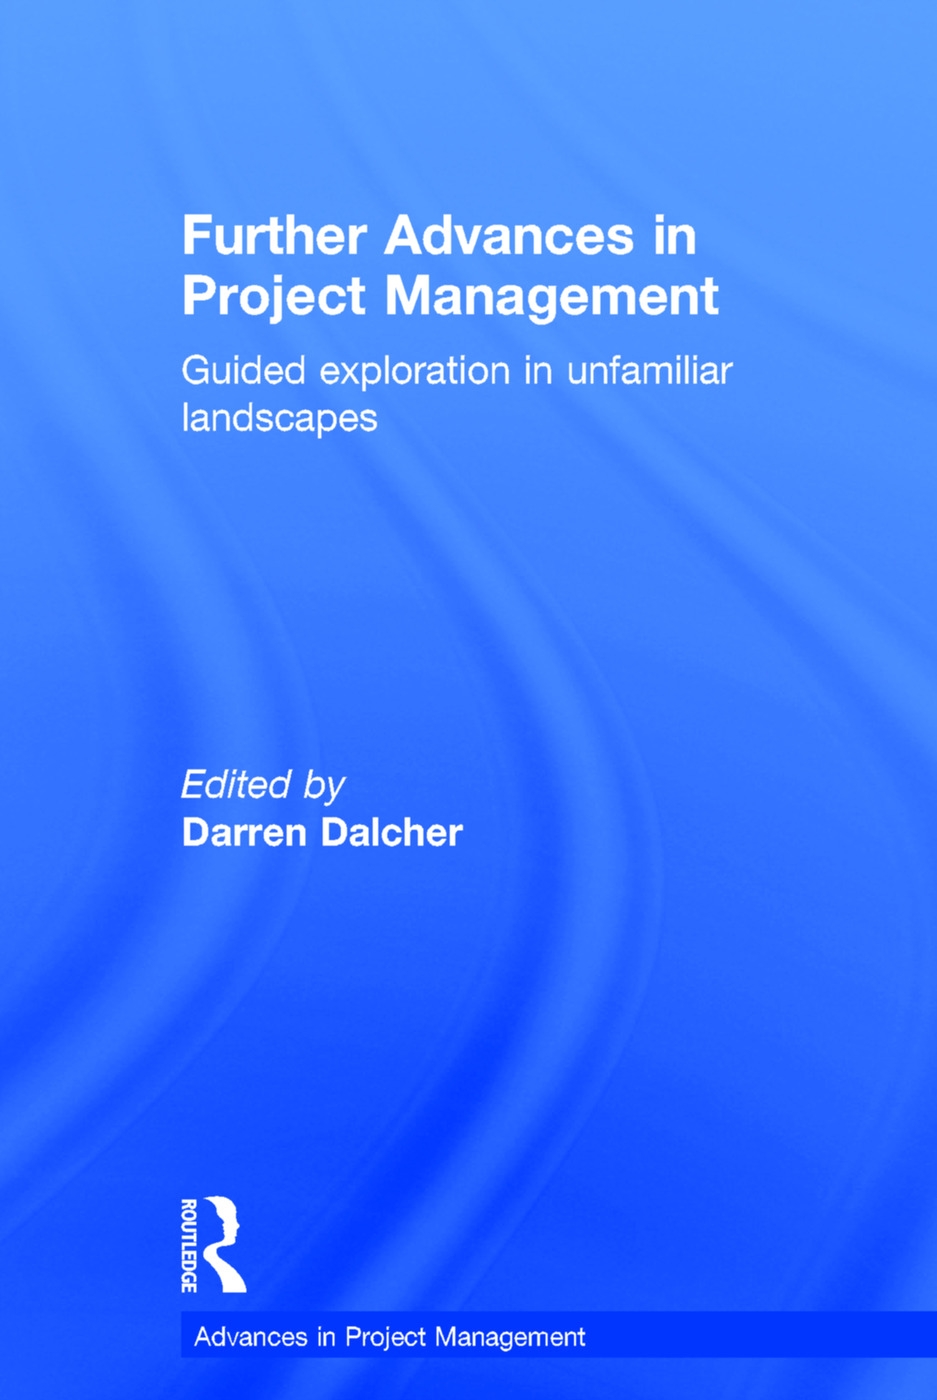 Further Advances in Project Management: Guided exploration in unfamiliar landscapes